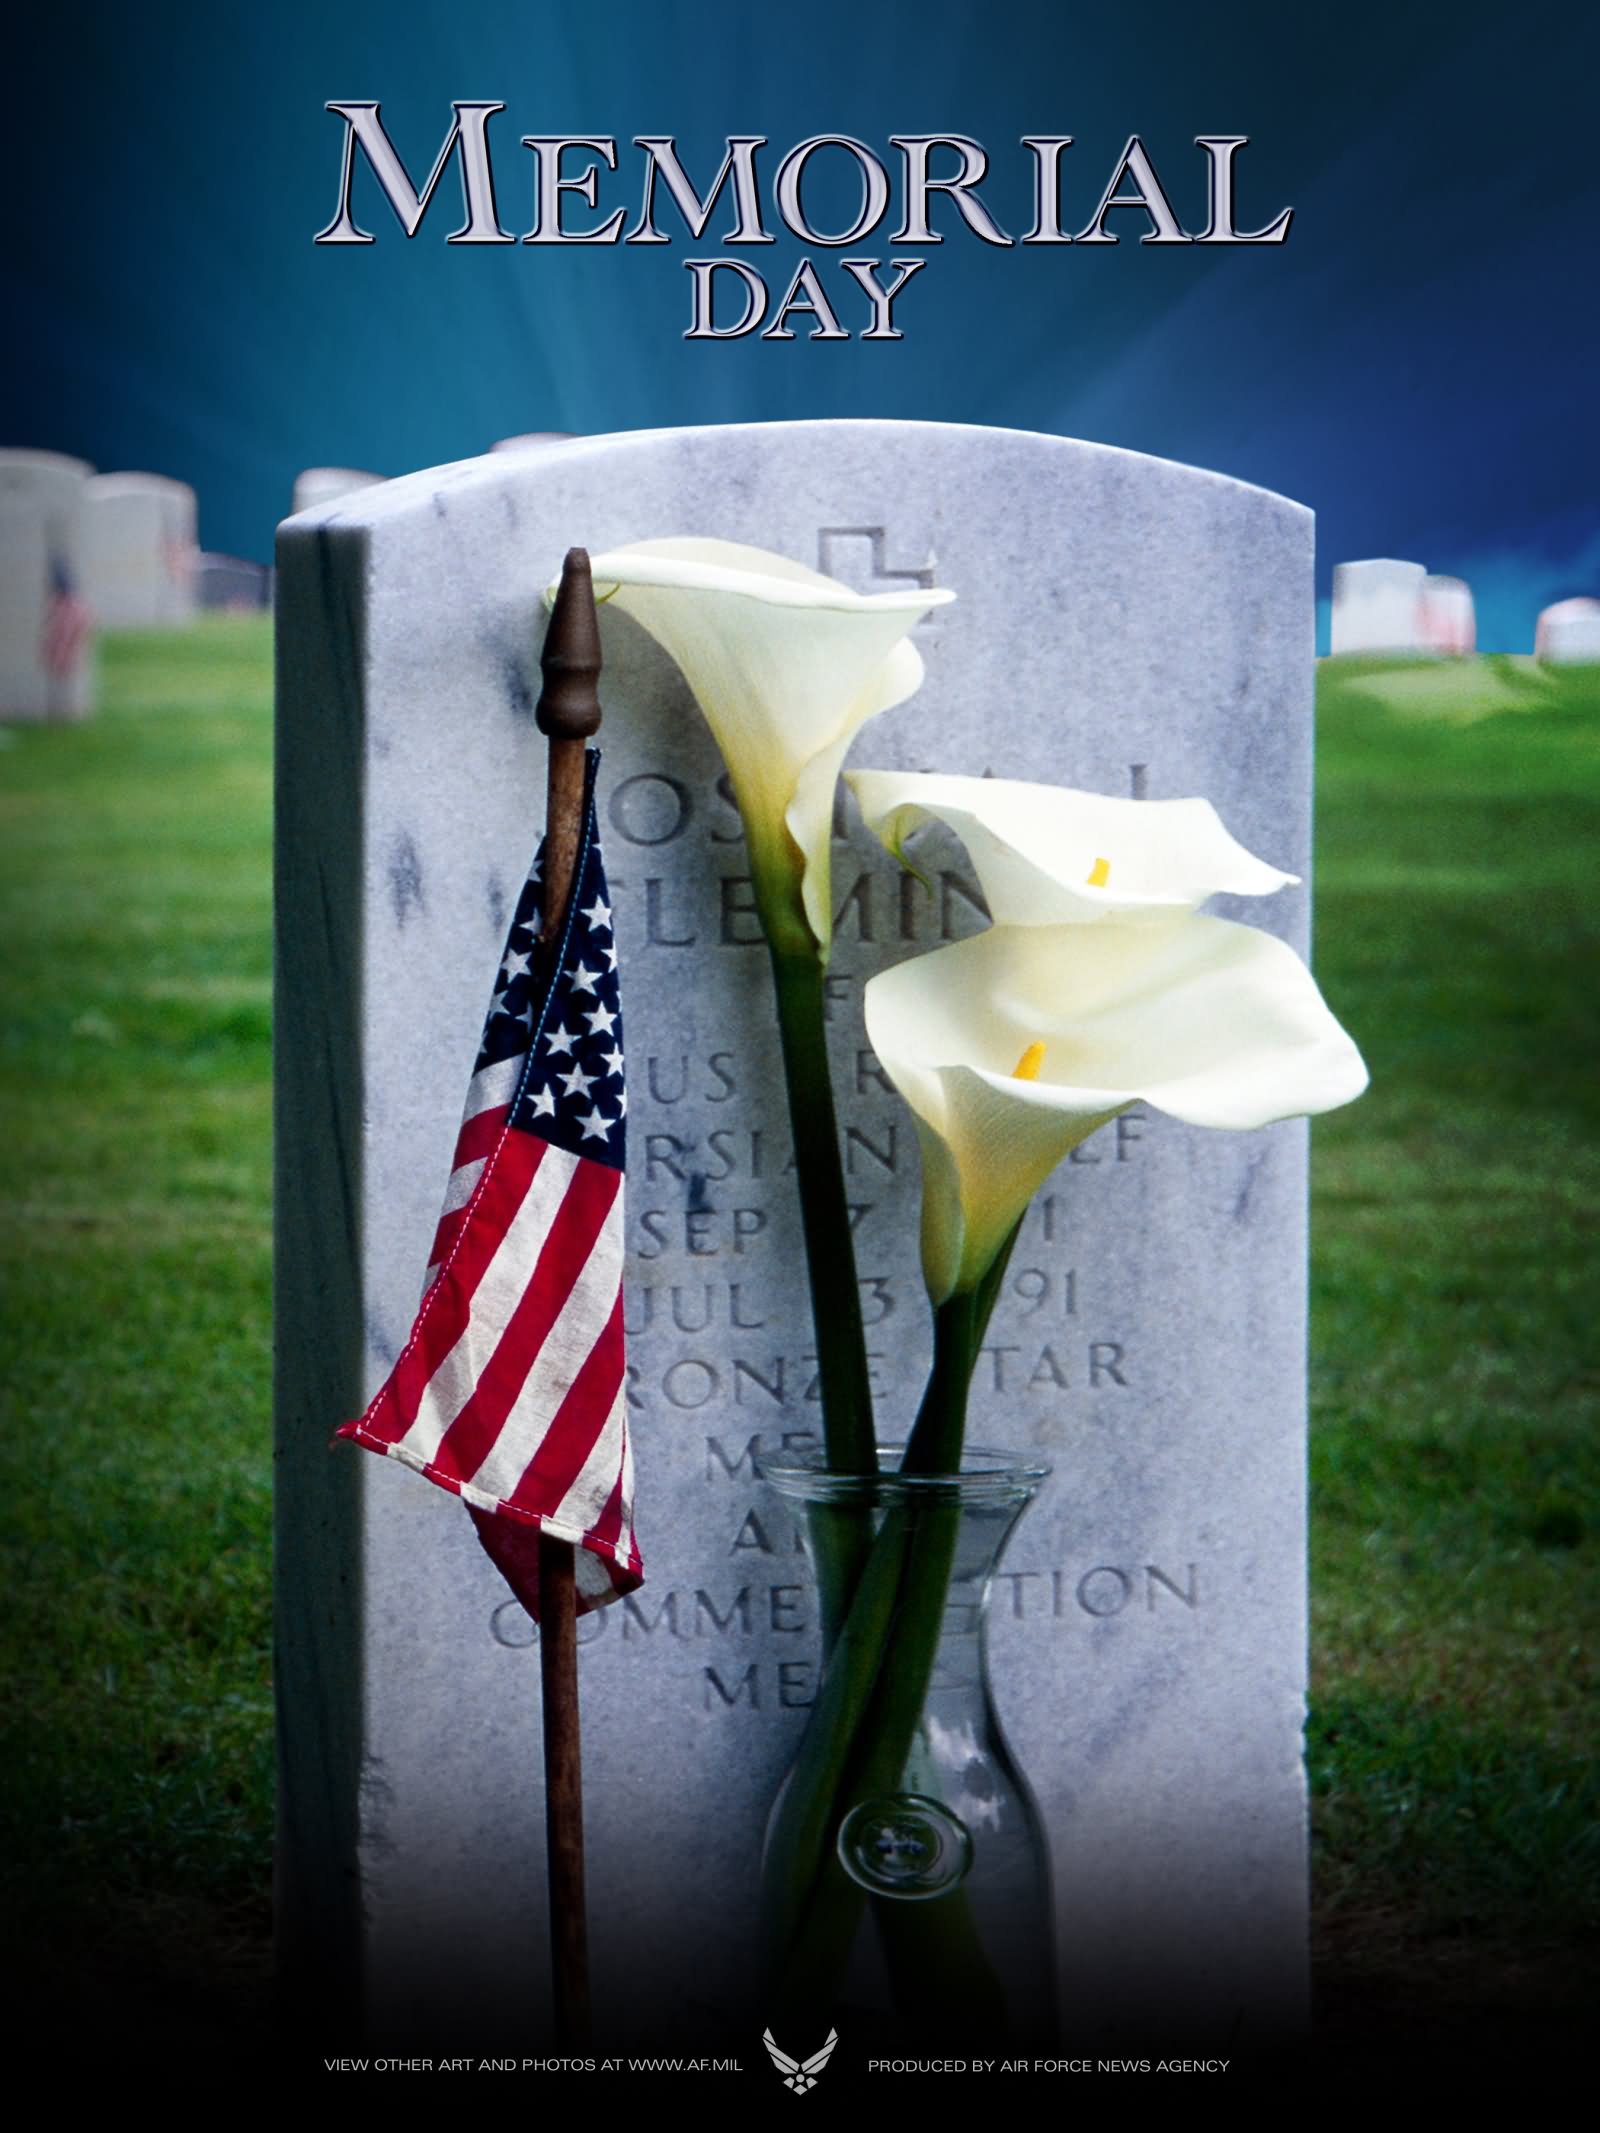 50+ Most Beautiful Memorial Day 2016 Wish Pictures And Images